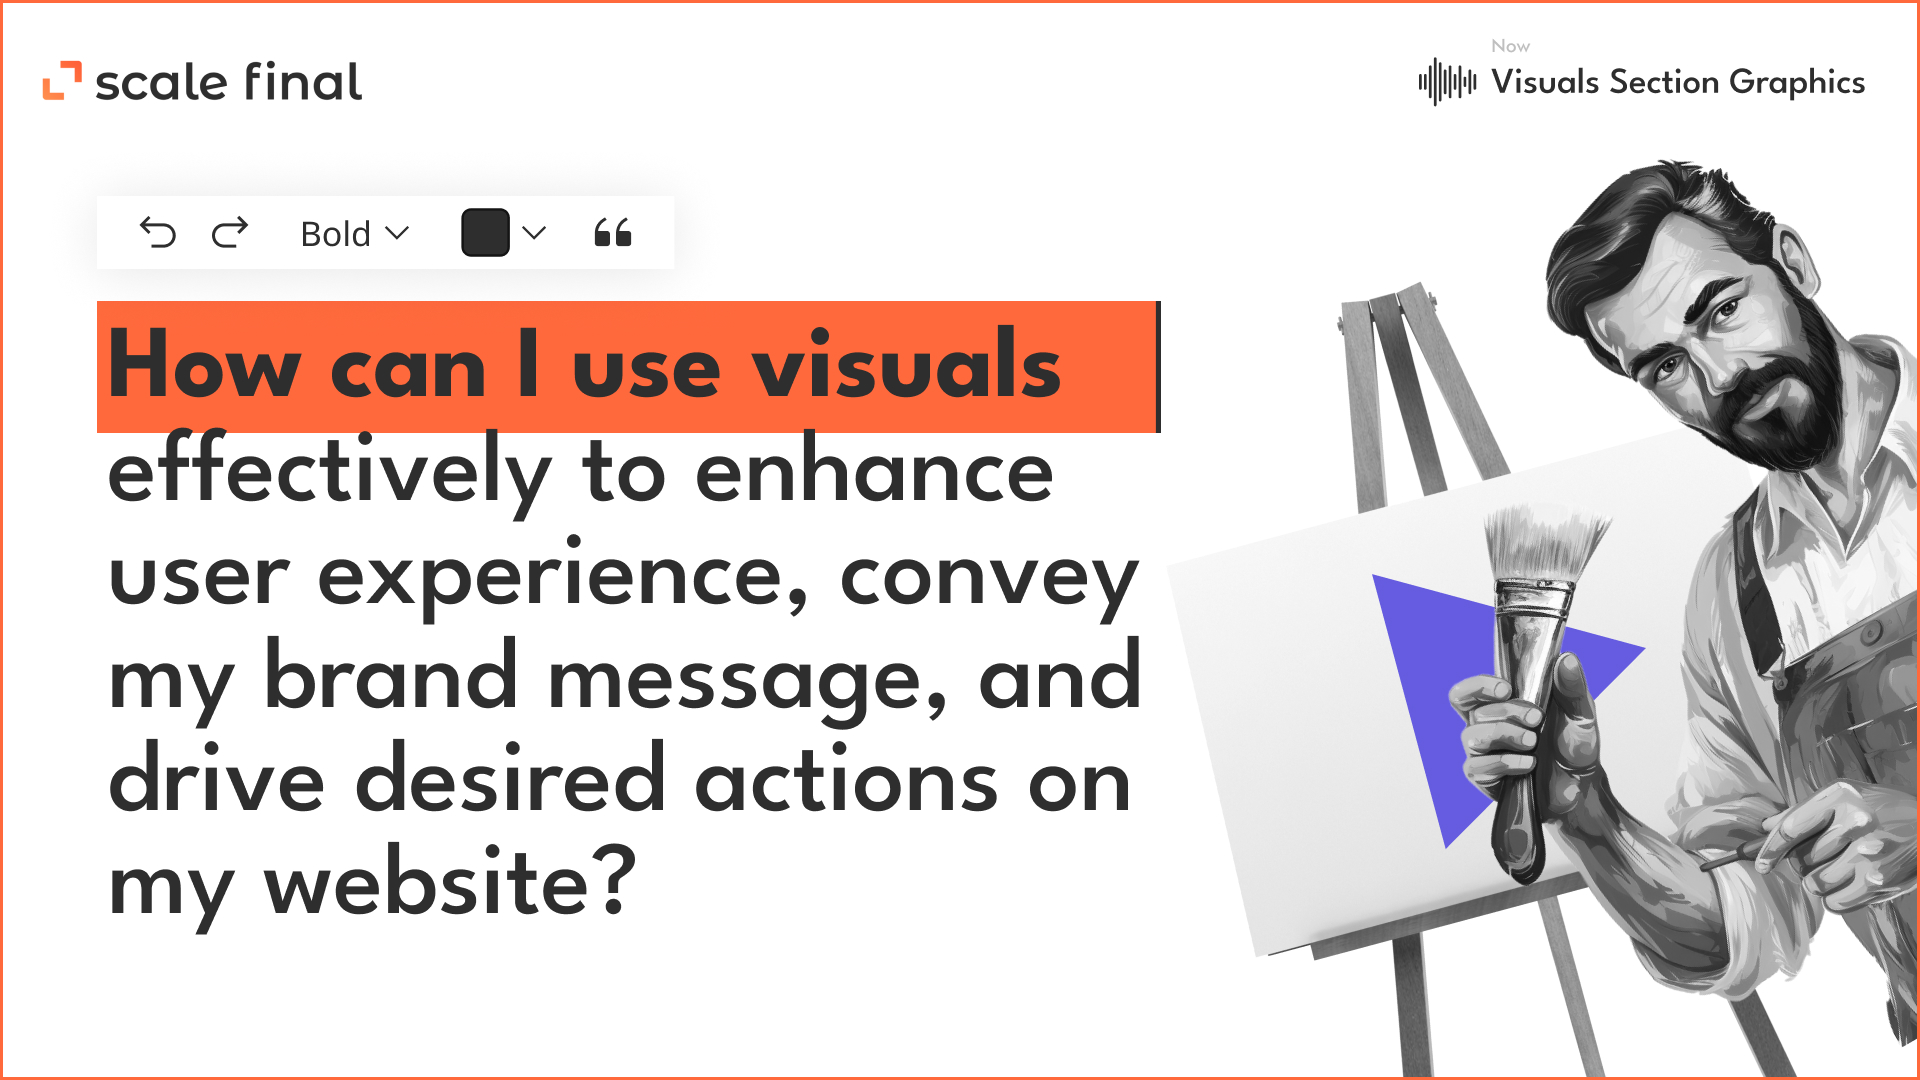 Visuals картинка: How can I use visuals effectively to enhance user experience, convey my brand message, and drive desired actions on my website?